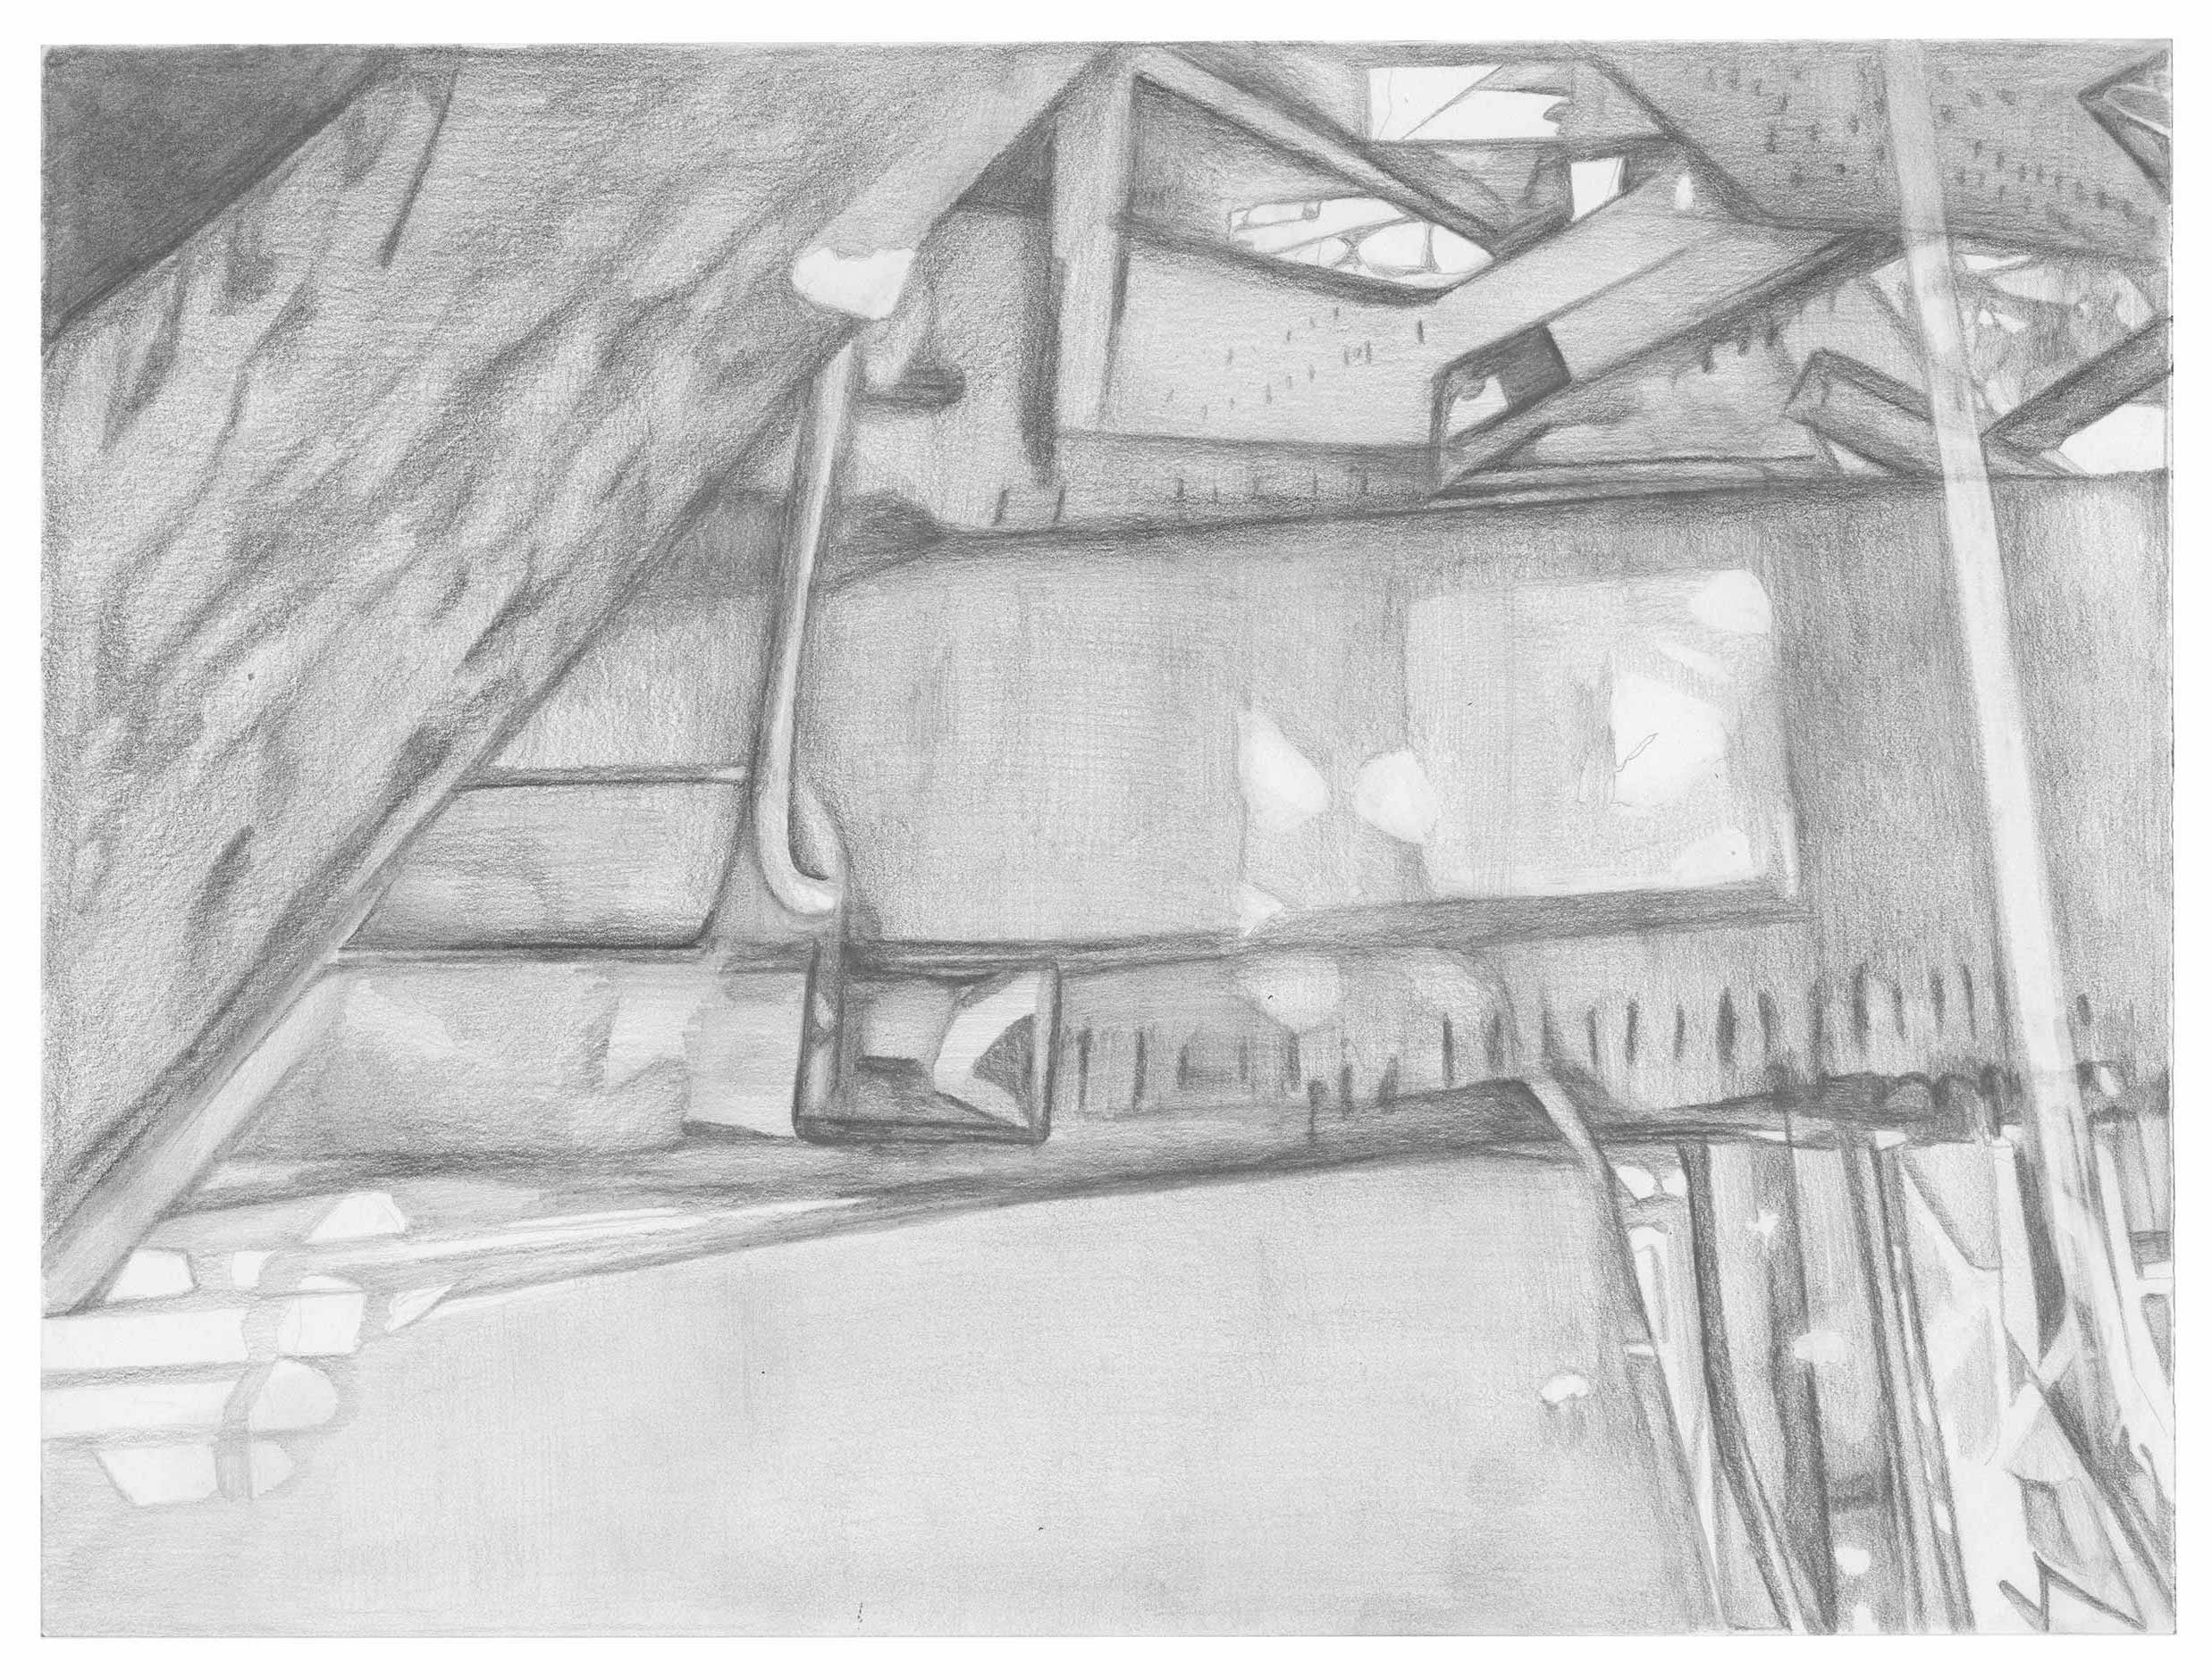 A semi-abstract pencil drawing of an industrial landscape with large tone variation and texture by artist Caroline Coolidge.